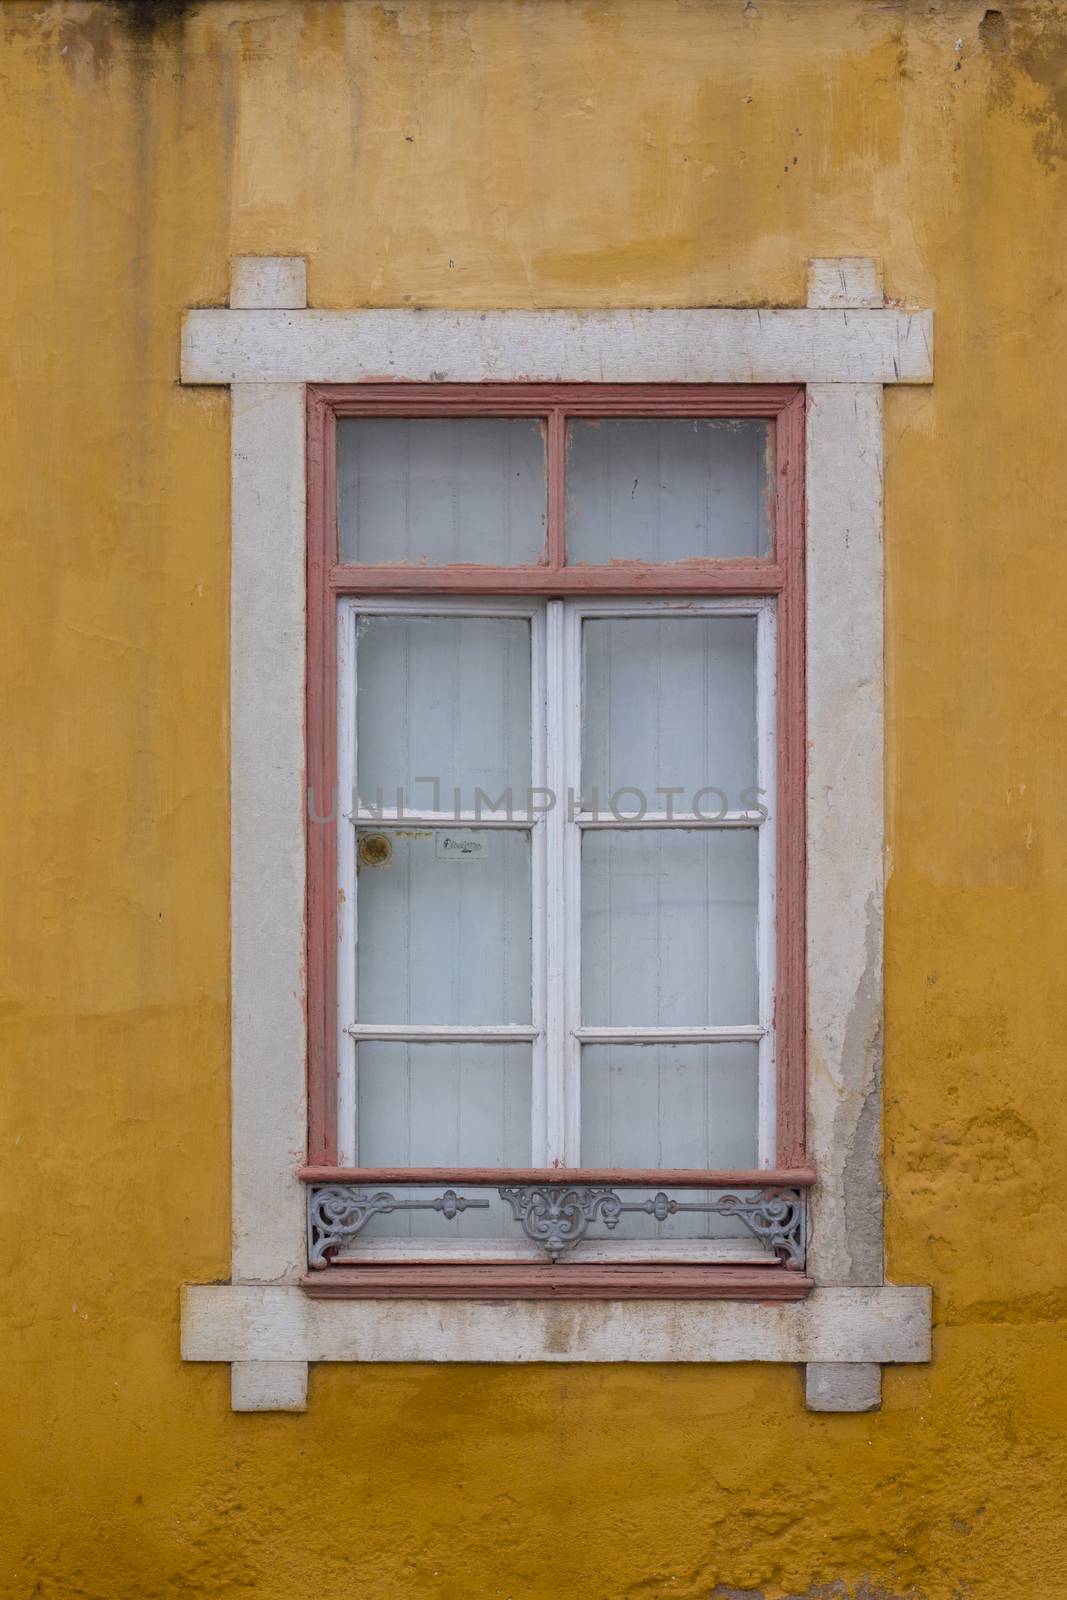 Typical windows of Portuguese architecture in buildings.